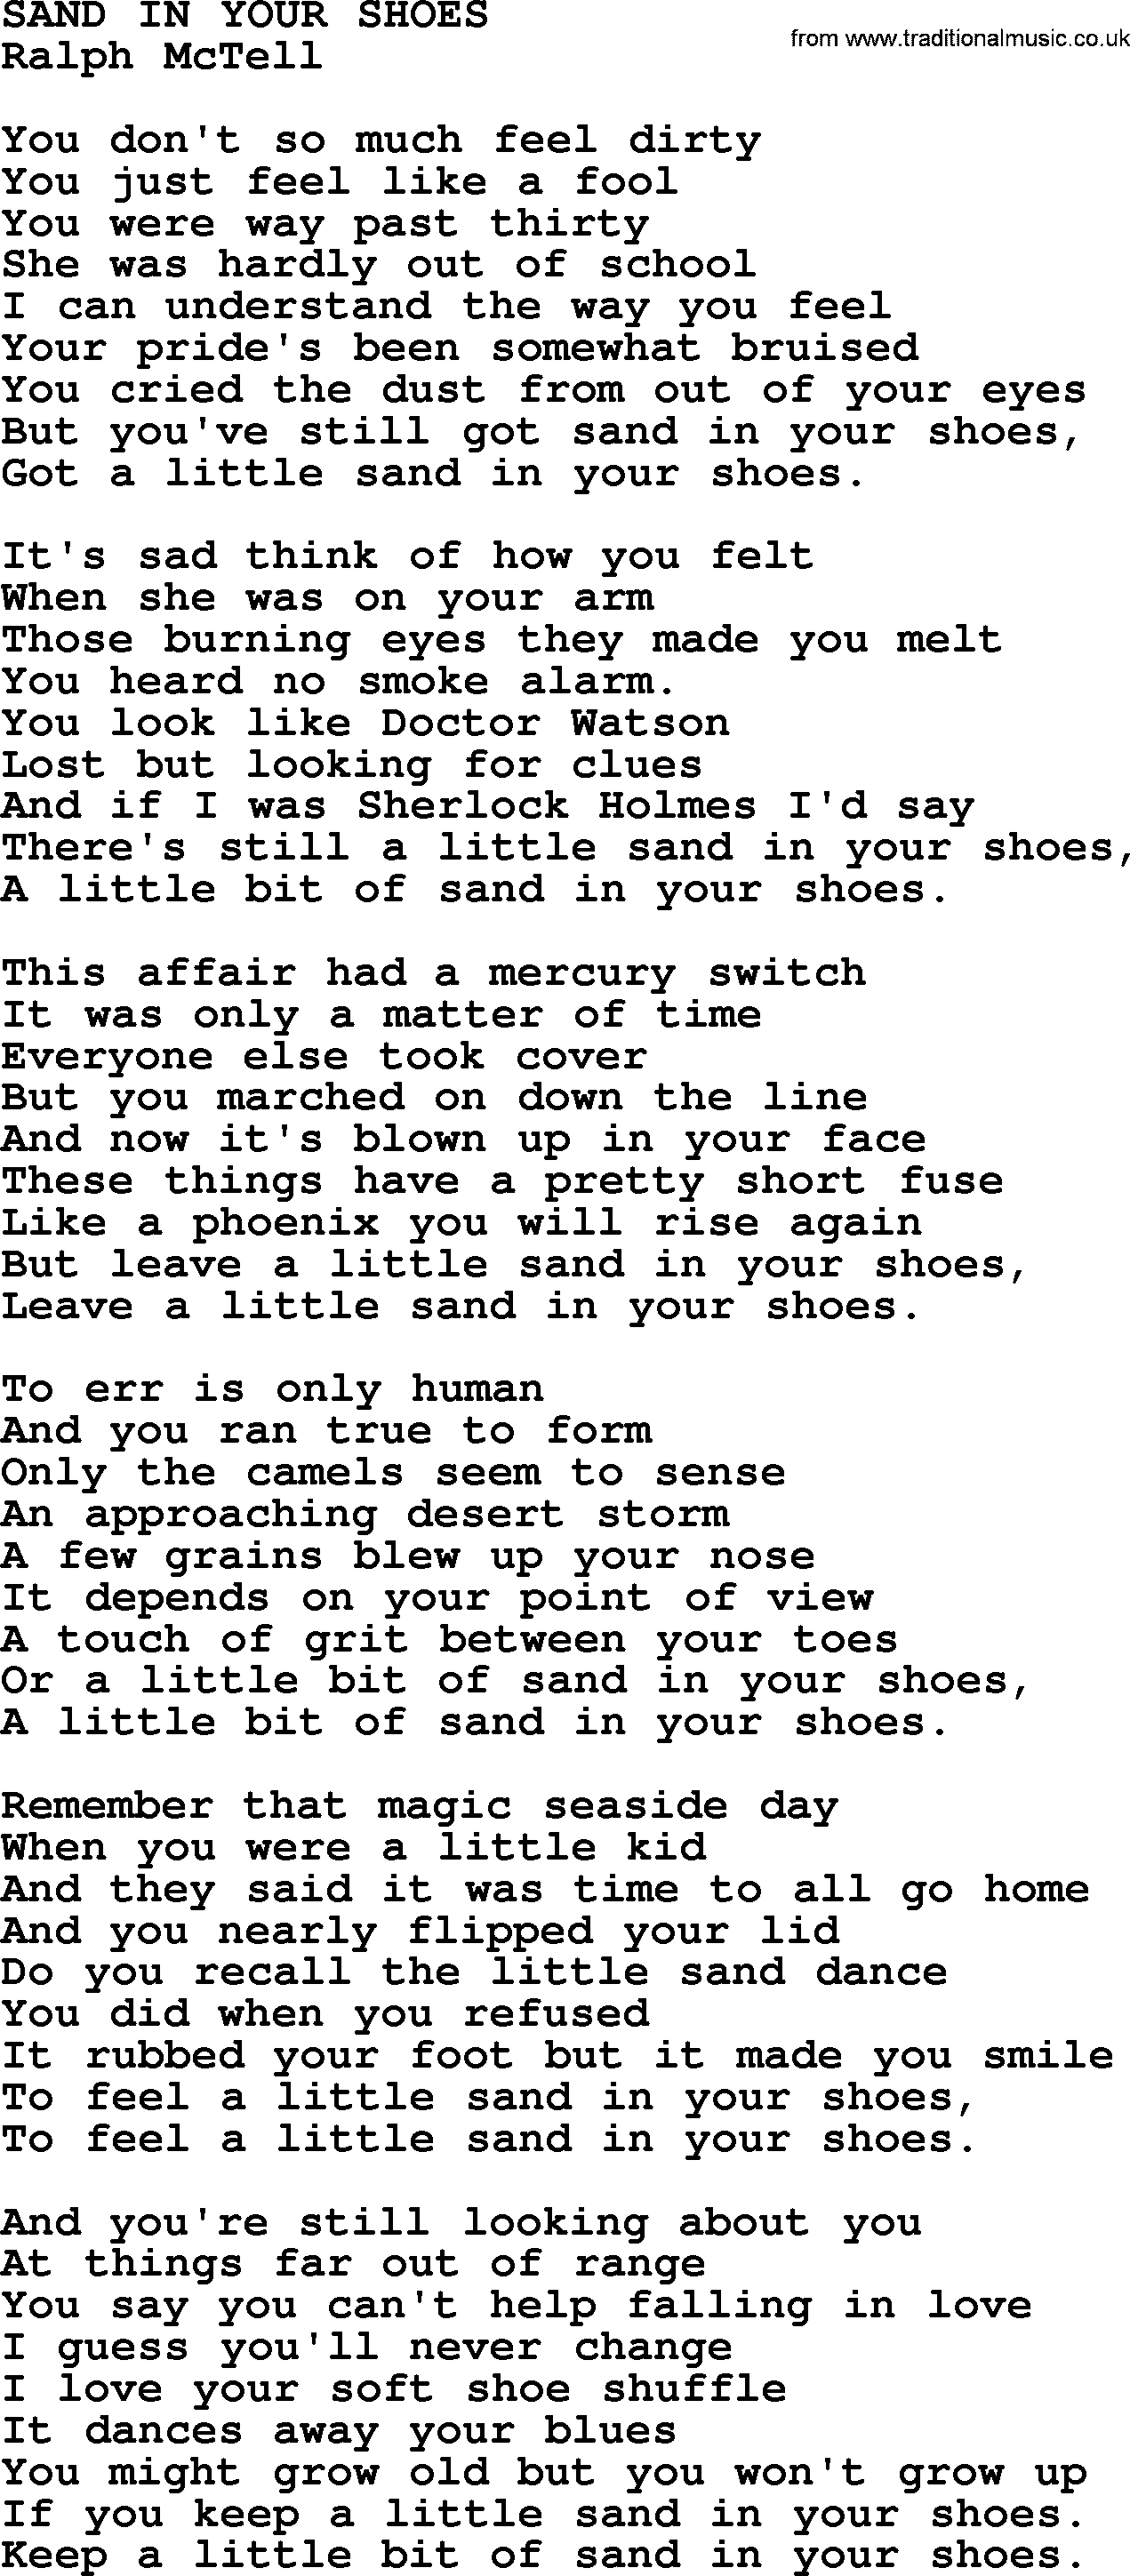 Ralph McTell Song: Sand In Your Shoes, lyrics